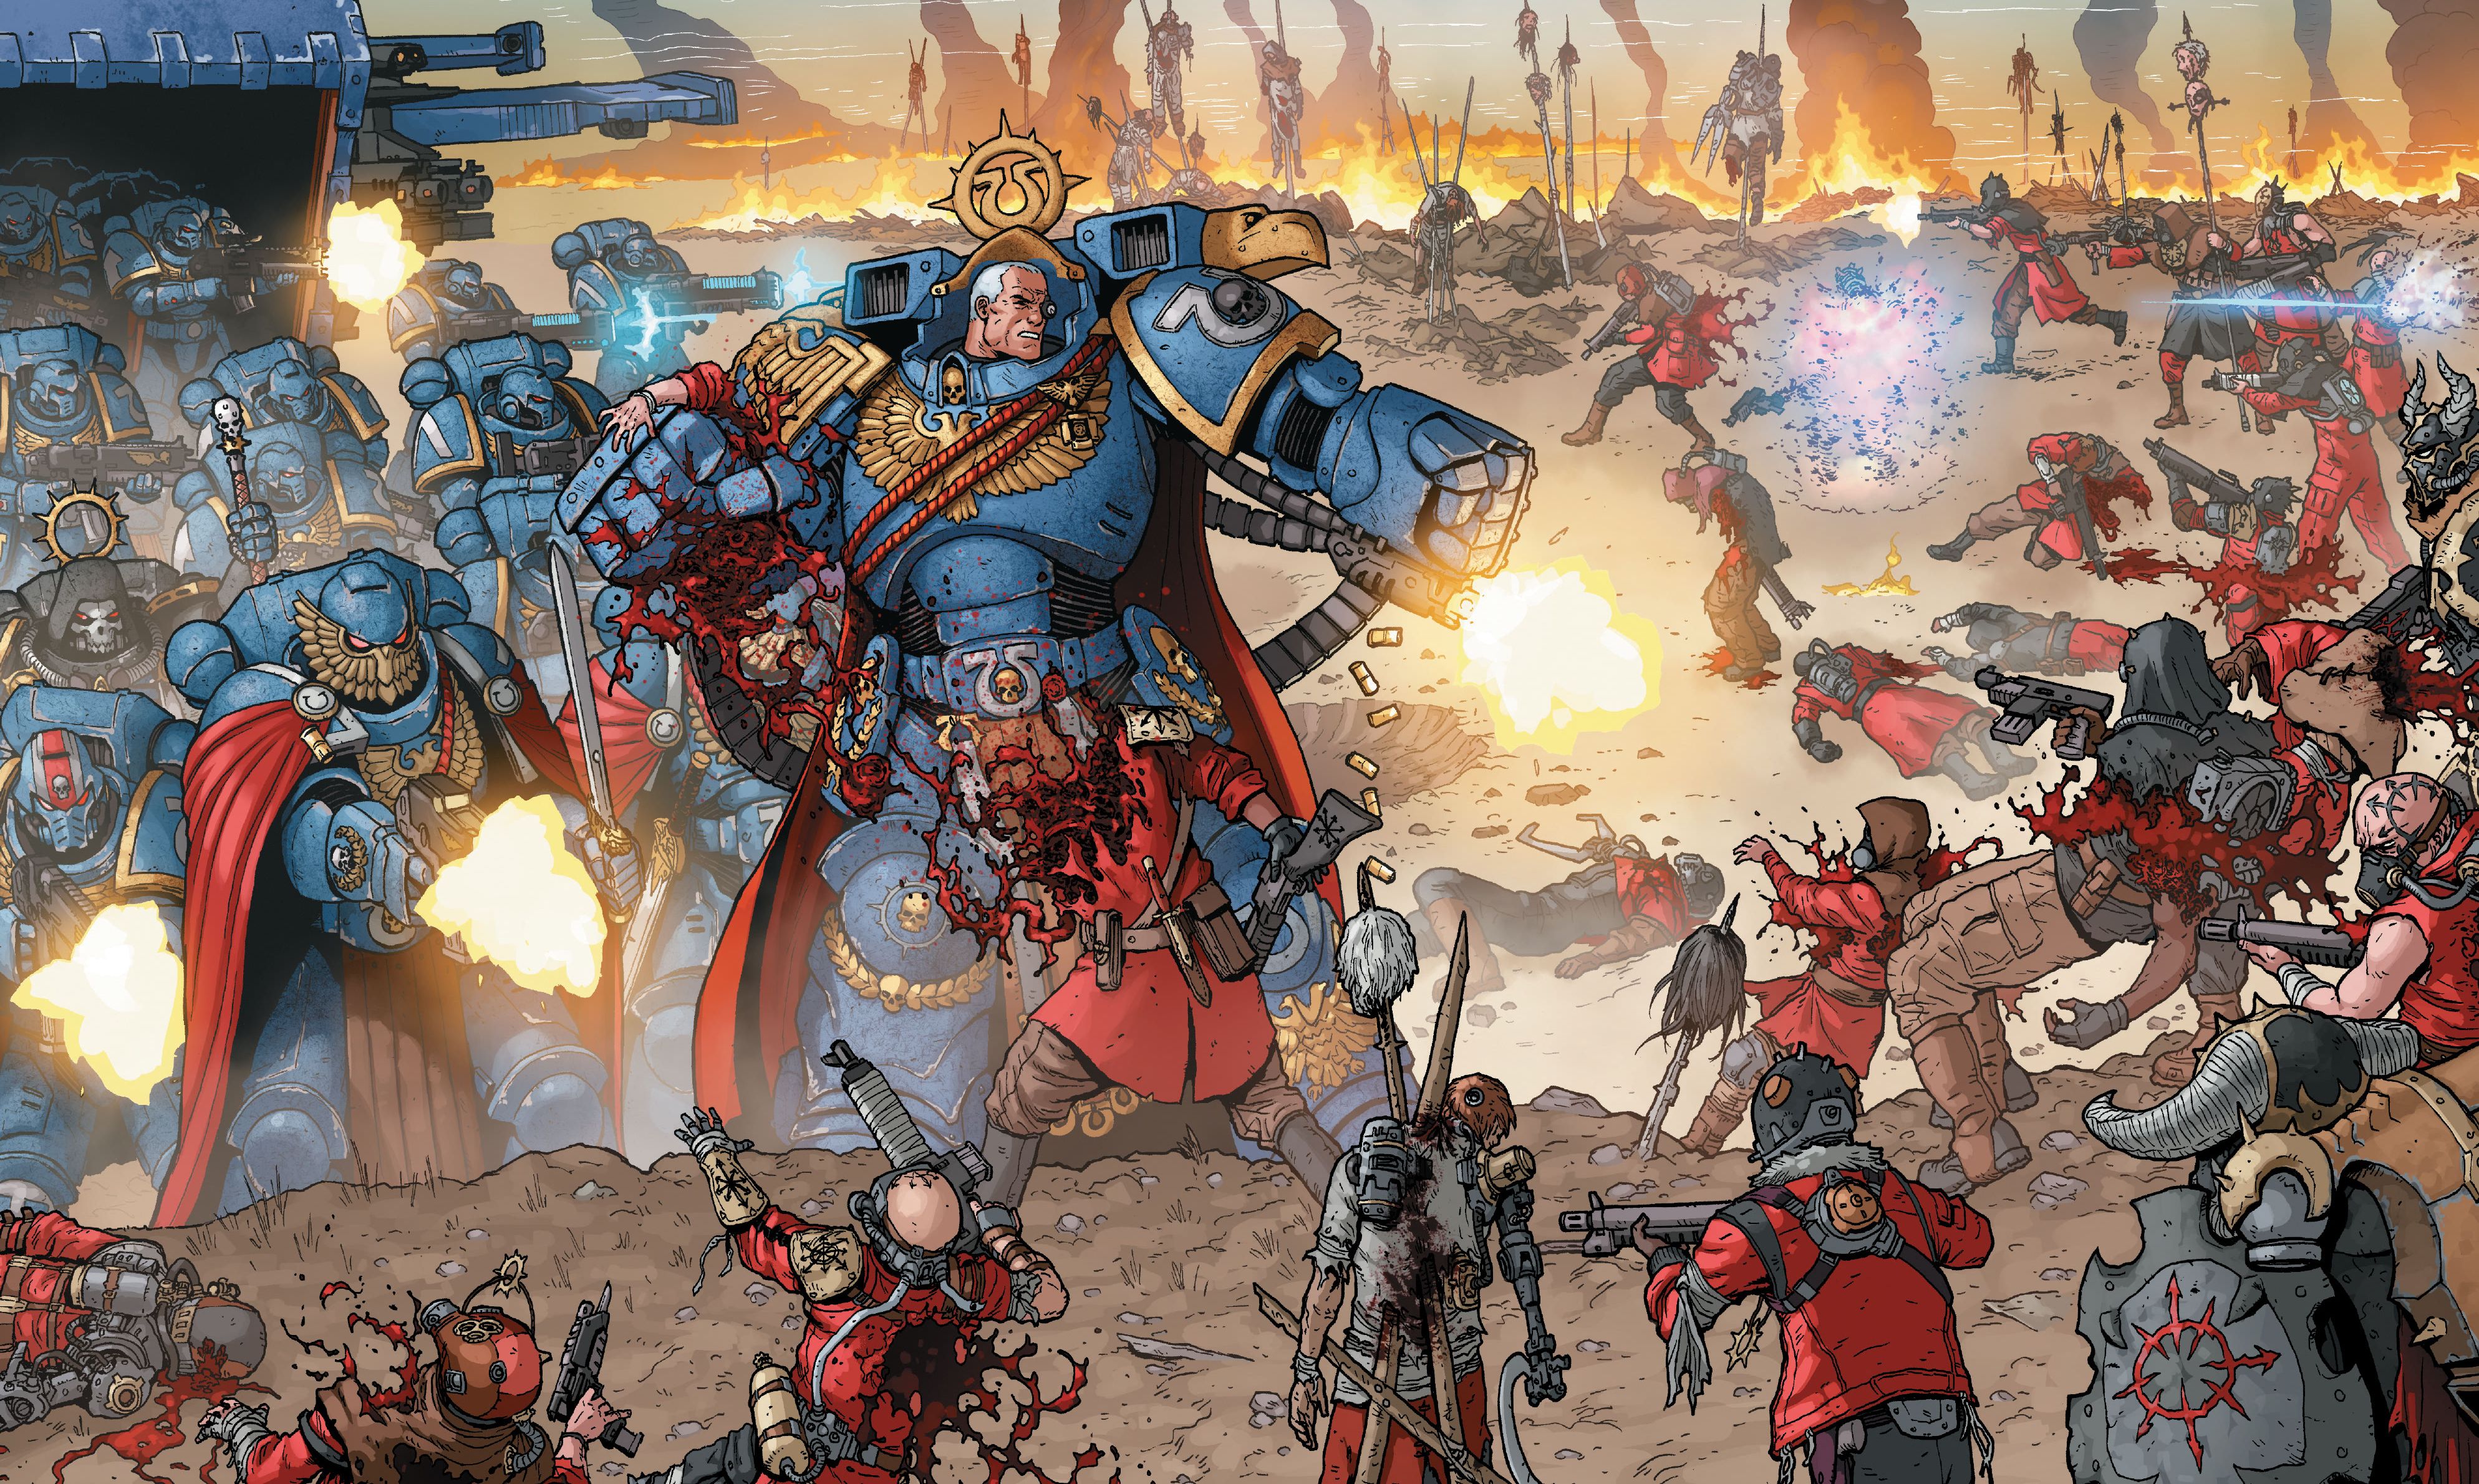 Marneus Calgar, from one of the best 40K books